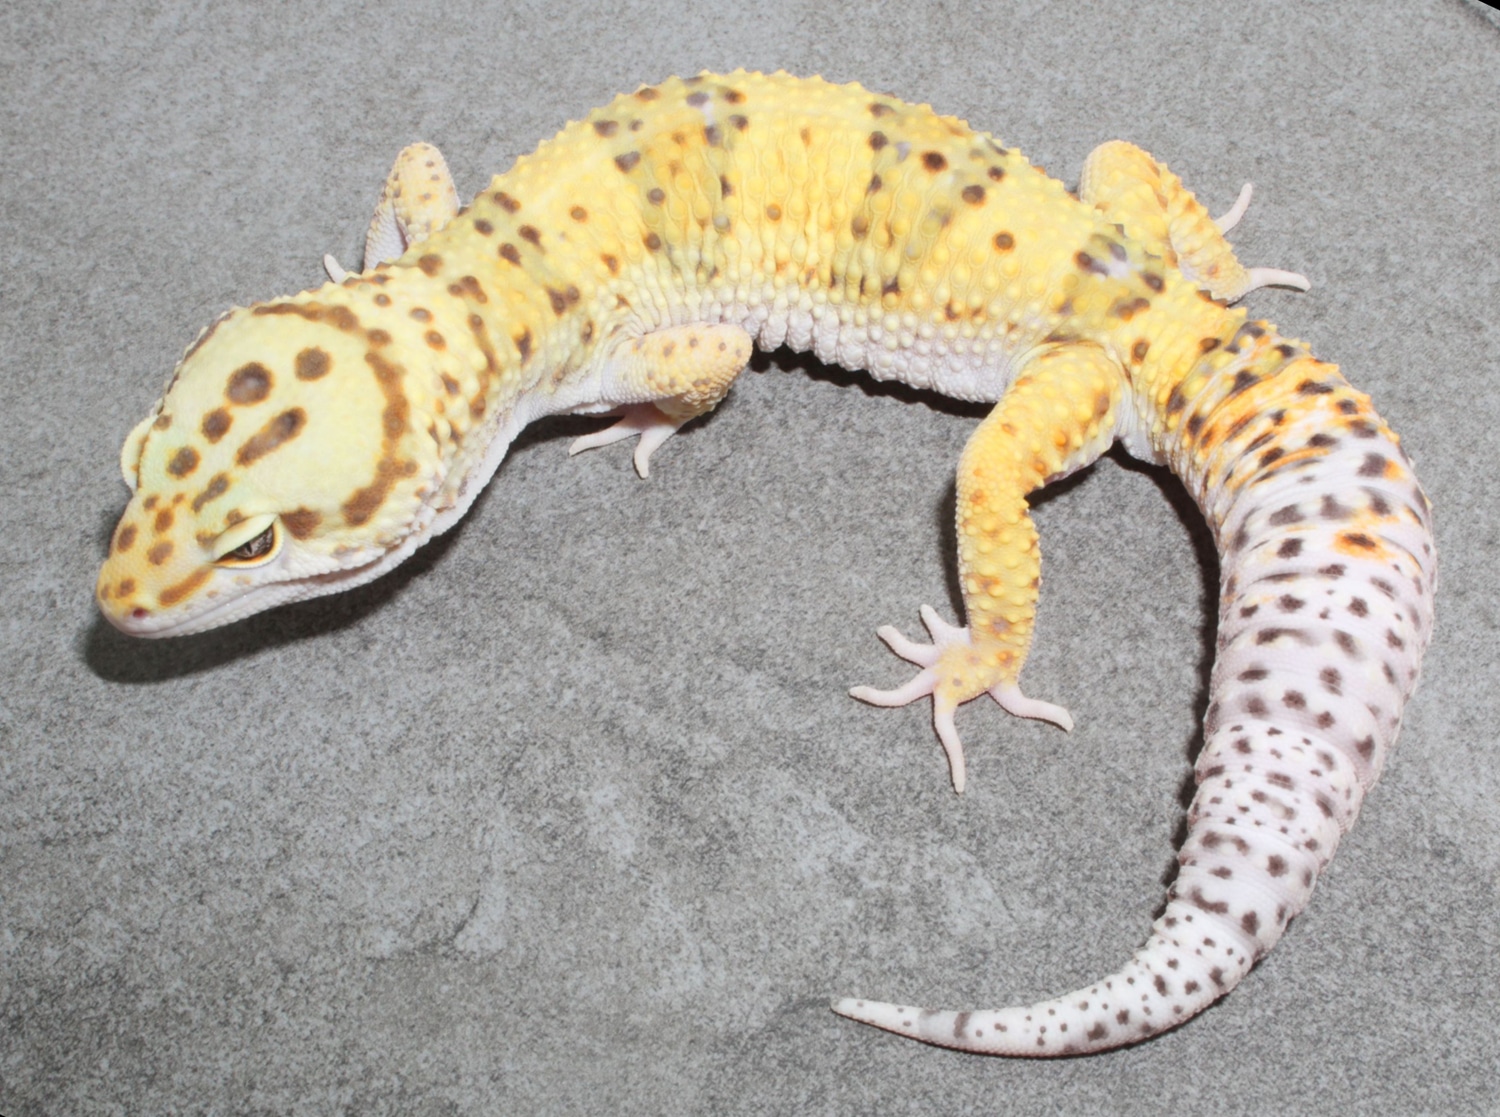 Eclipse 66% Ph Rainwater, & Murphy Patternless Leopard Gecko by Impeccable Gecko